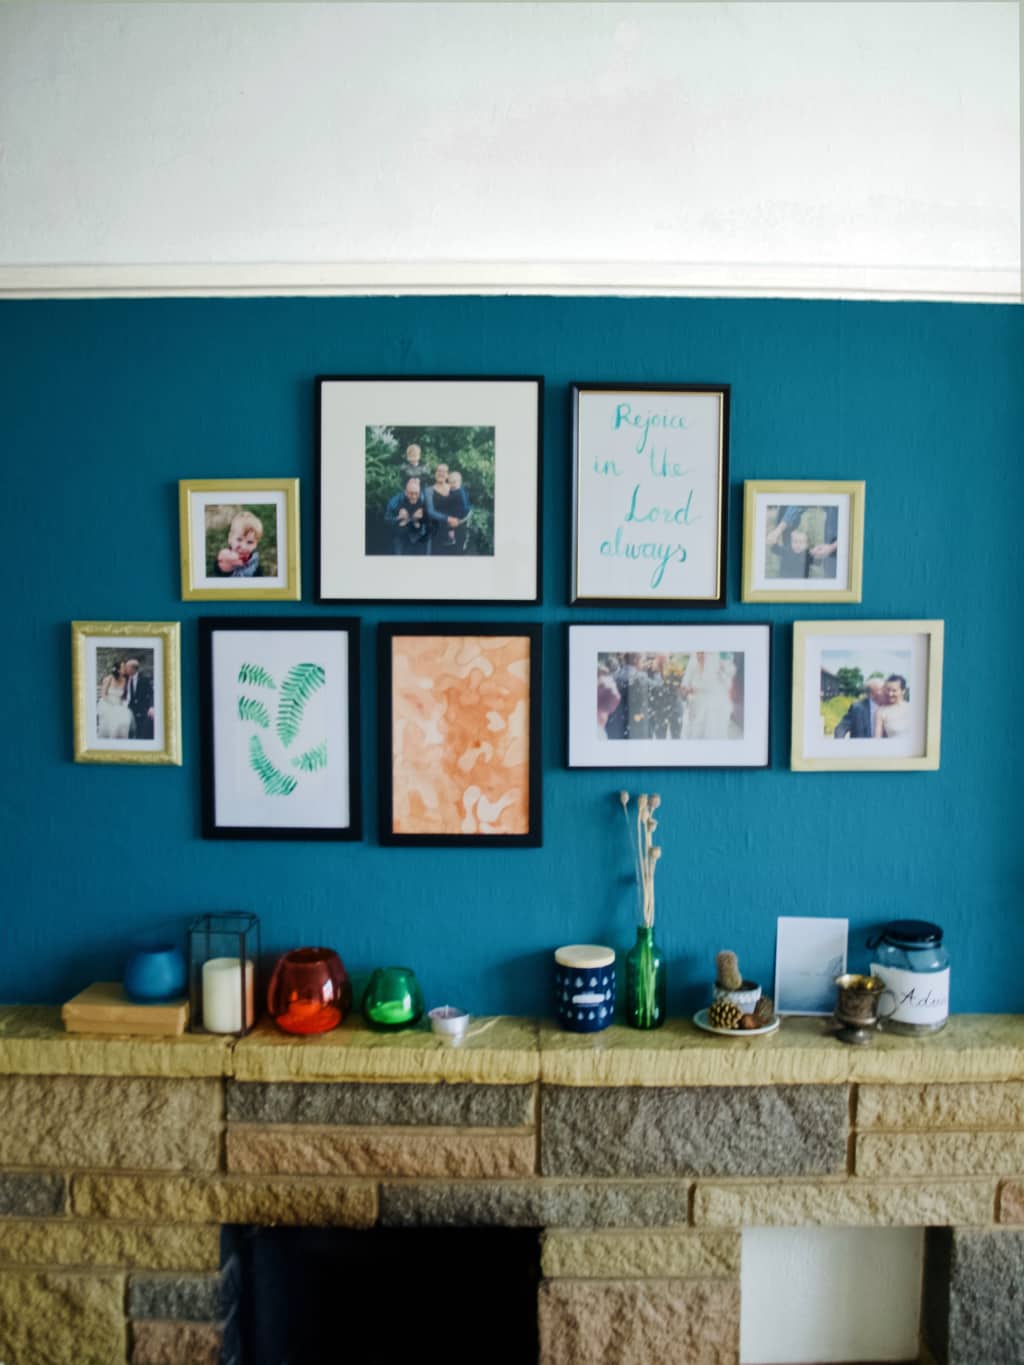 How to install a gallery wall in 5 easy steps